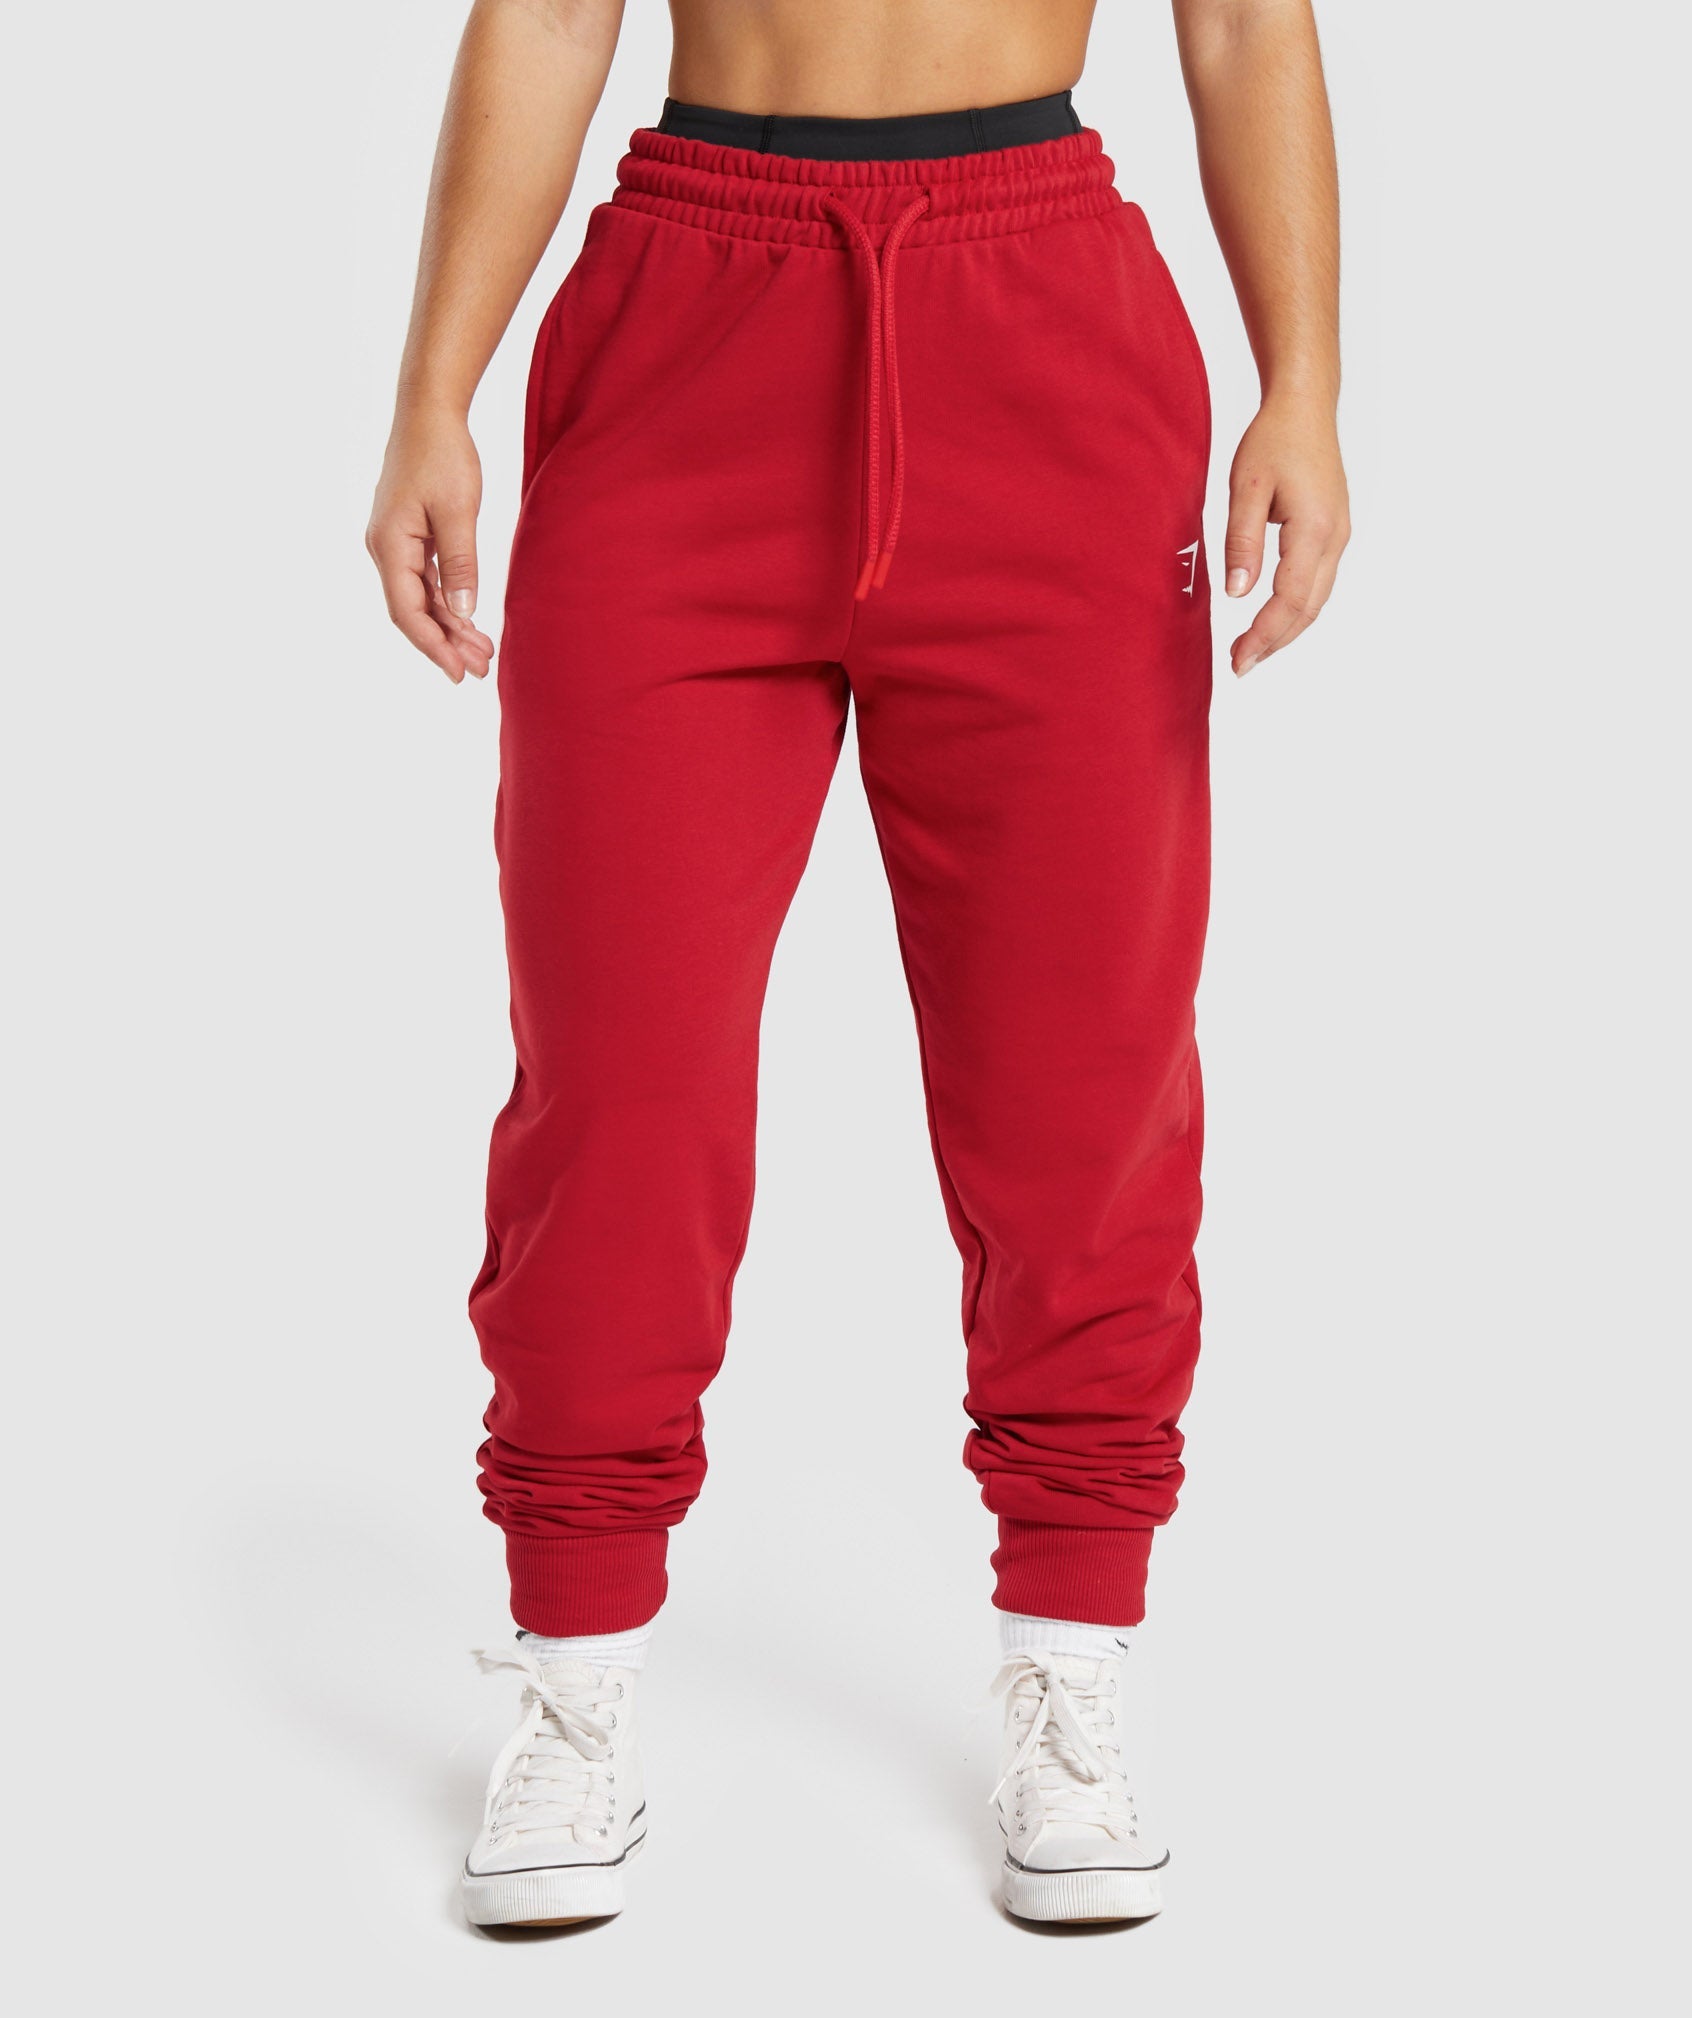 GS Power Joggers in Red - view 1